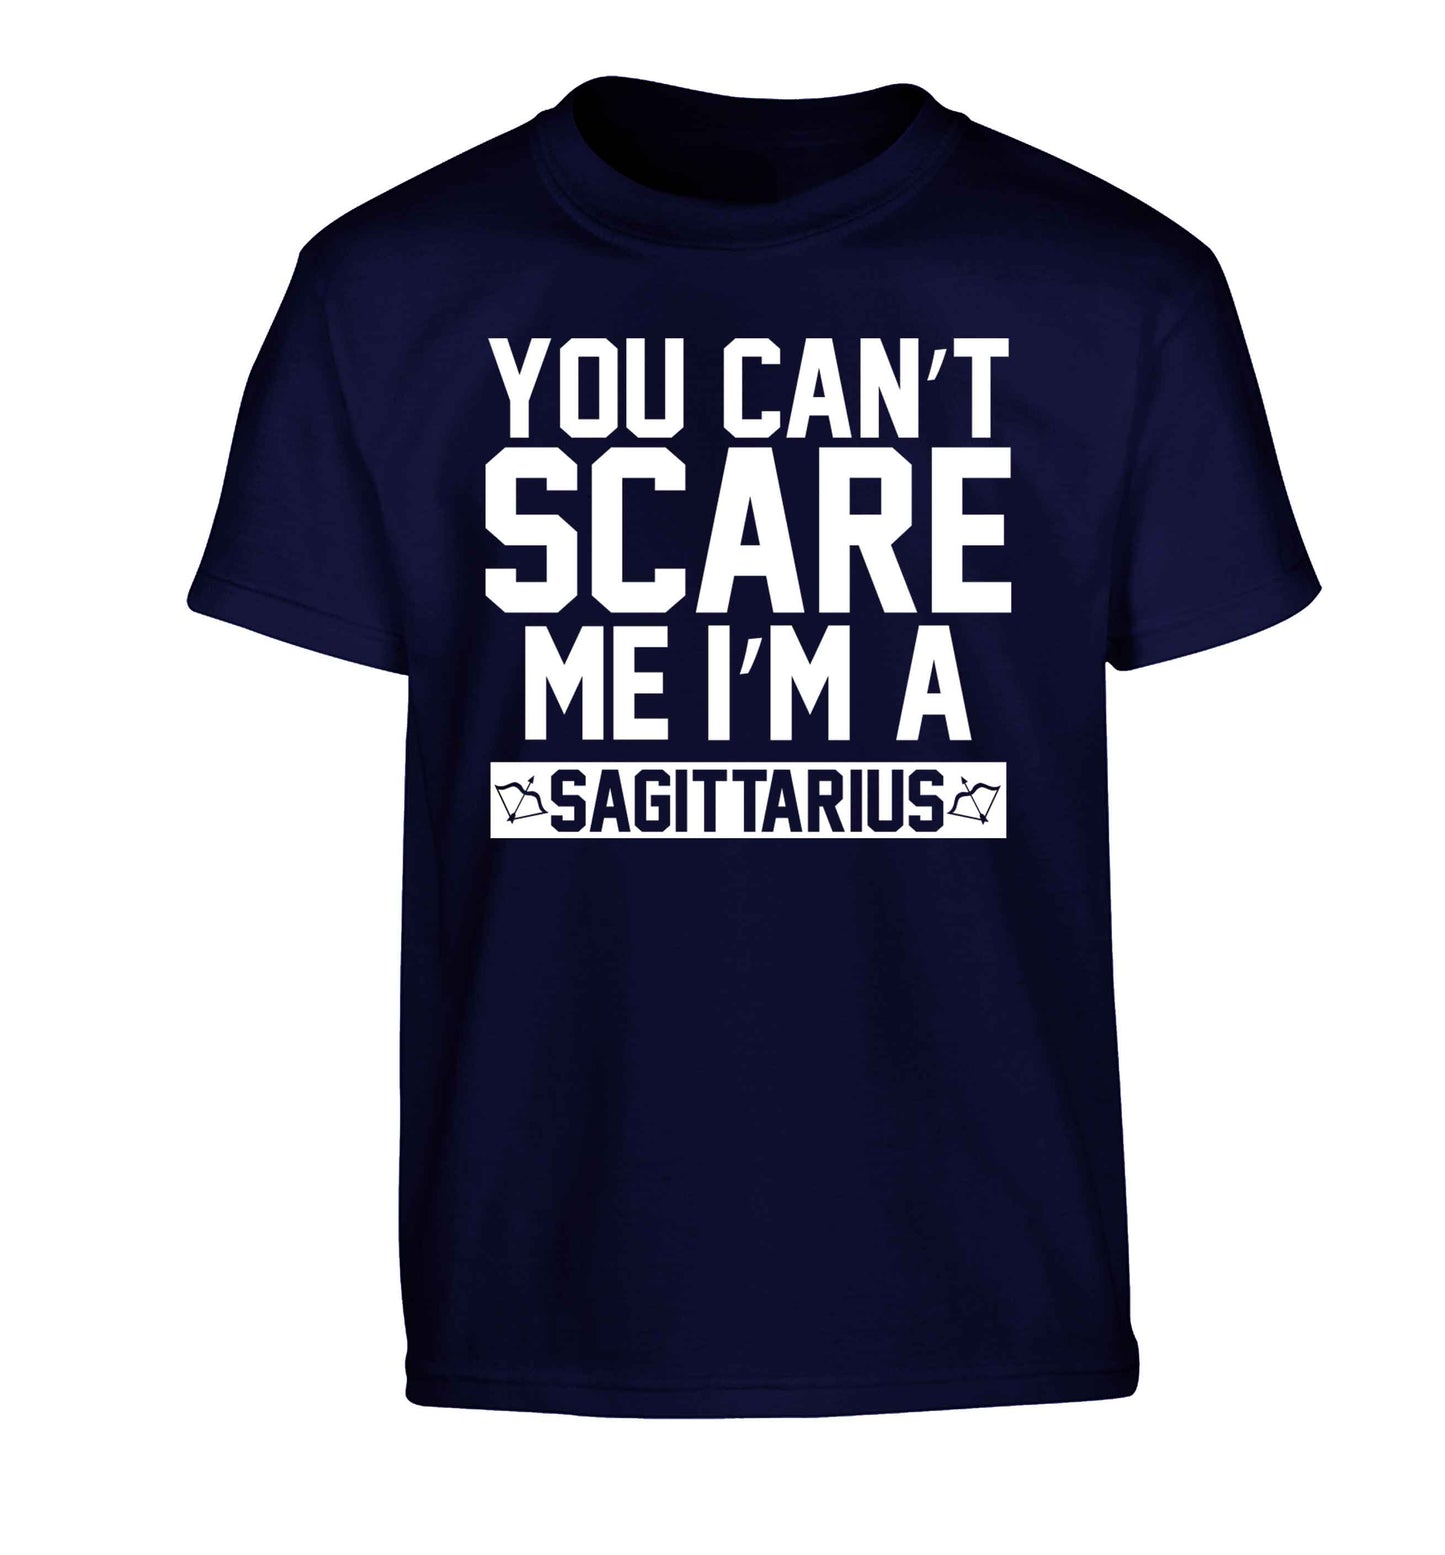 You can't scare me I'm a sagittarius Children's navy Tshirt 12-13 Years